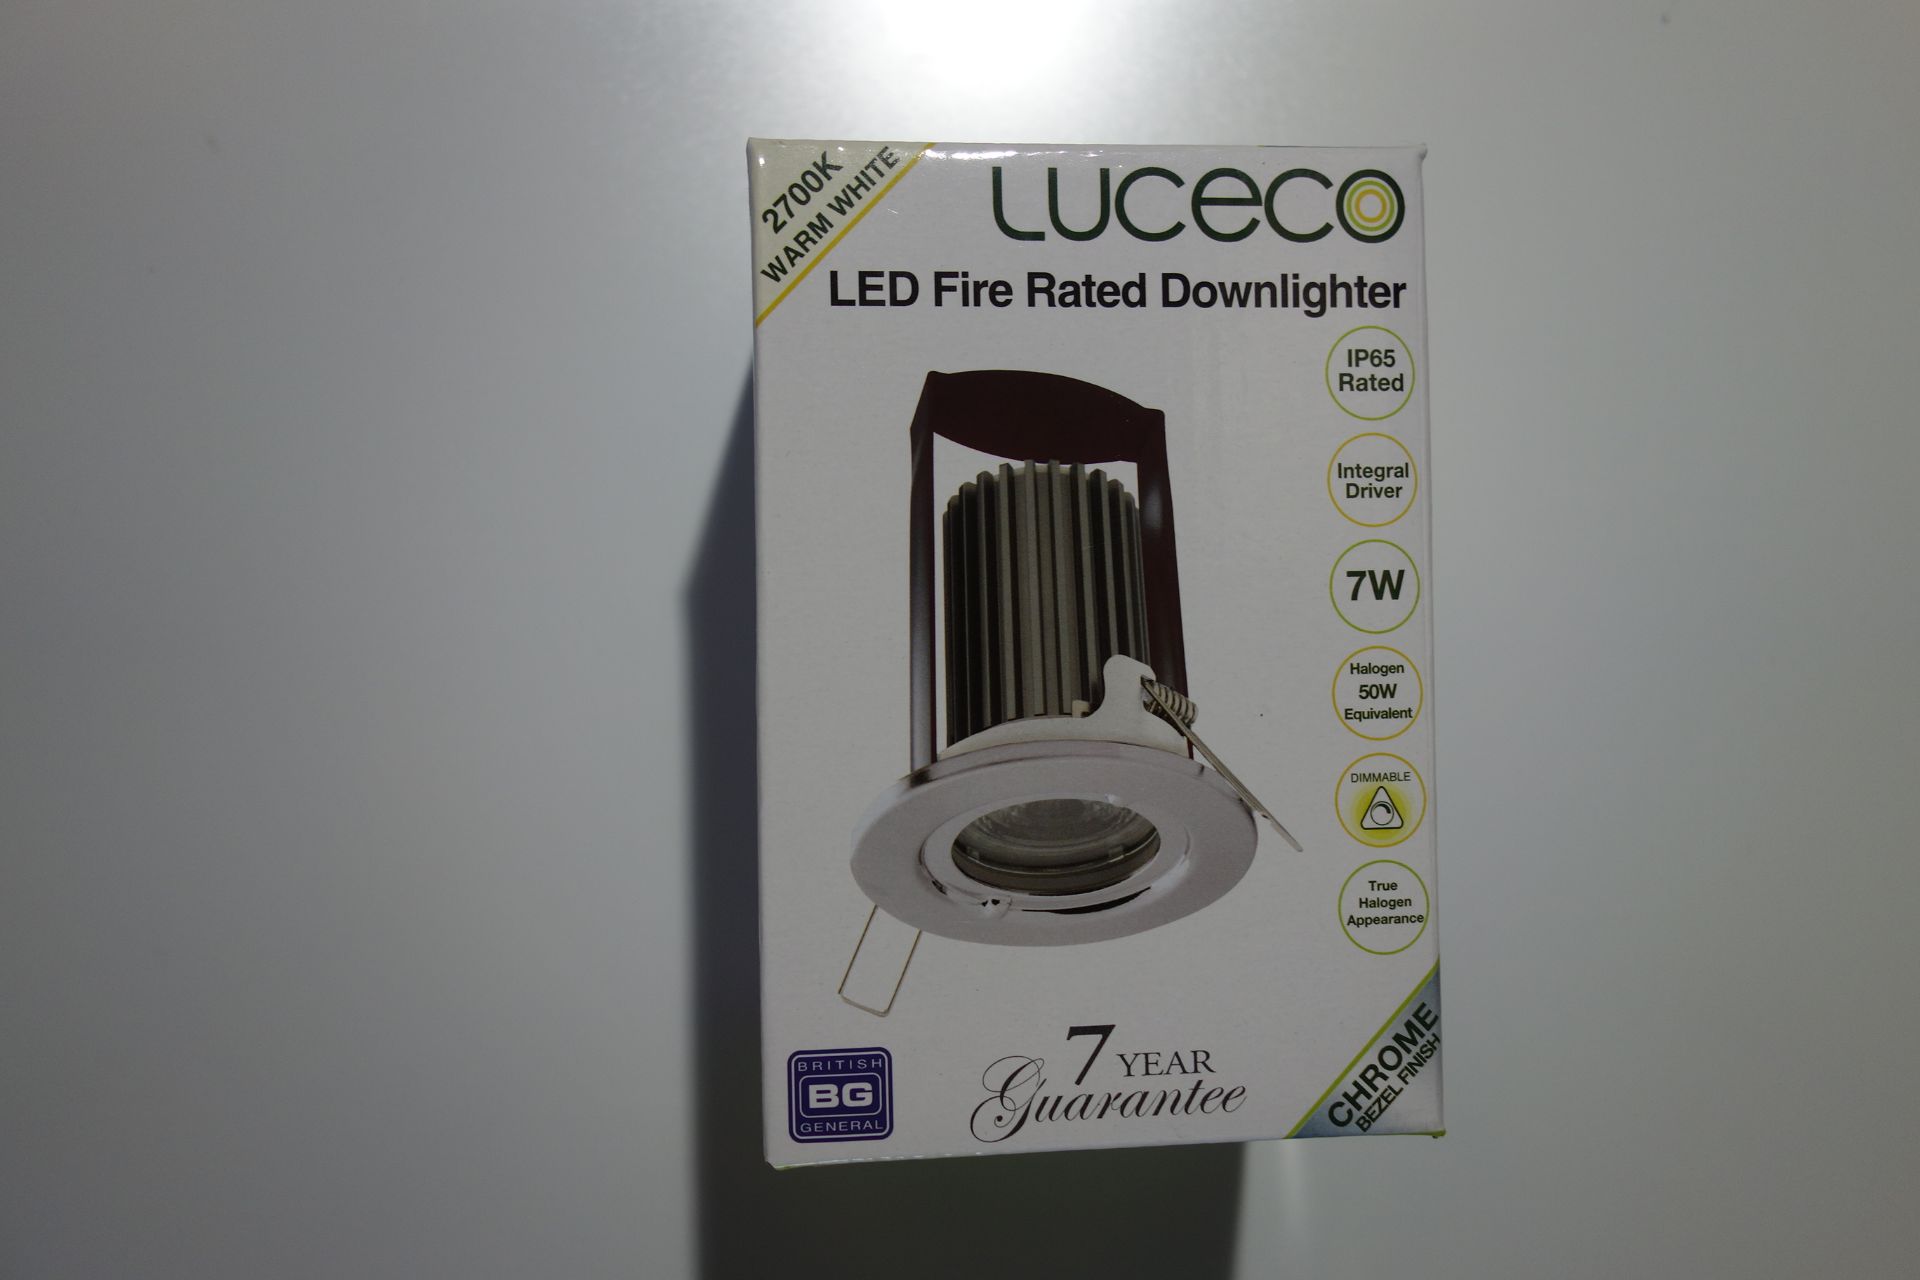 20 X LUCECO LFR7PC450D27 7W LED Fire Rated Downlight With/Integral Driver